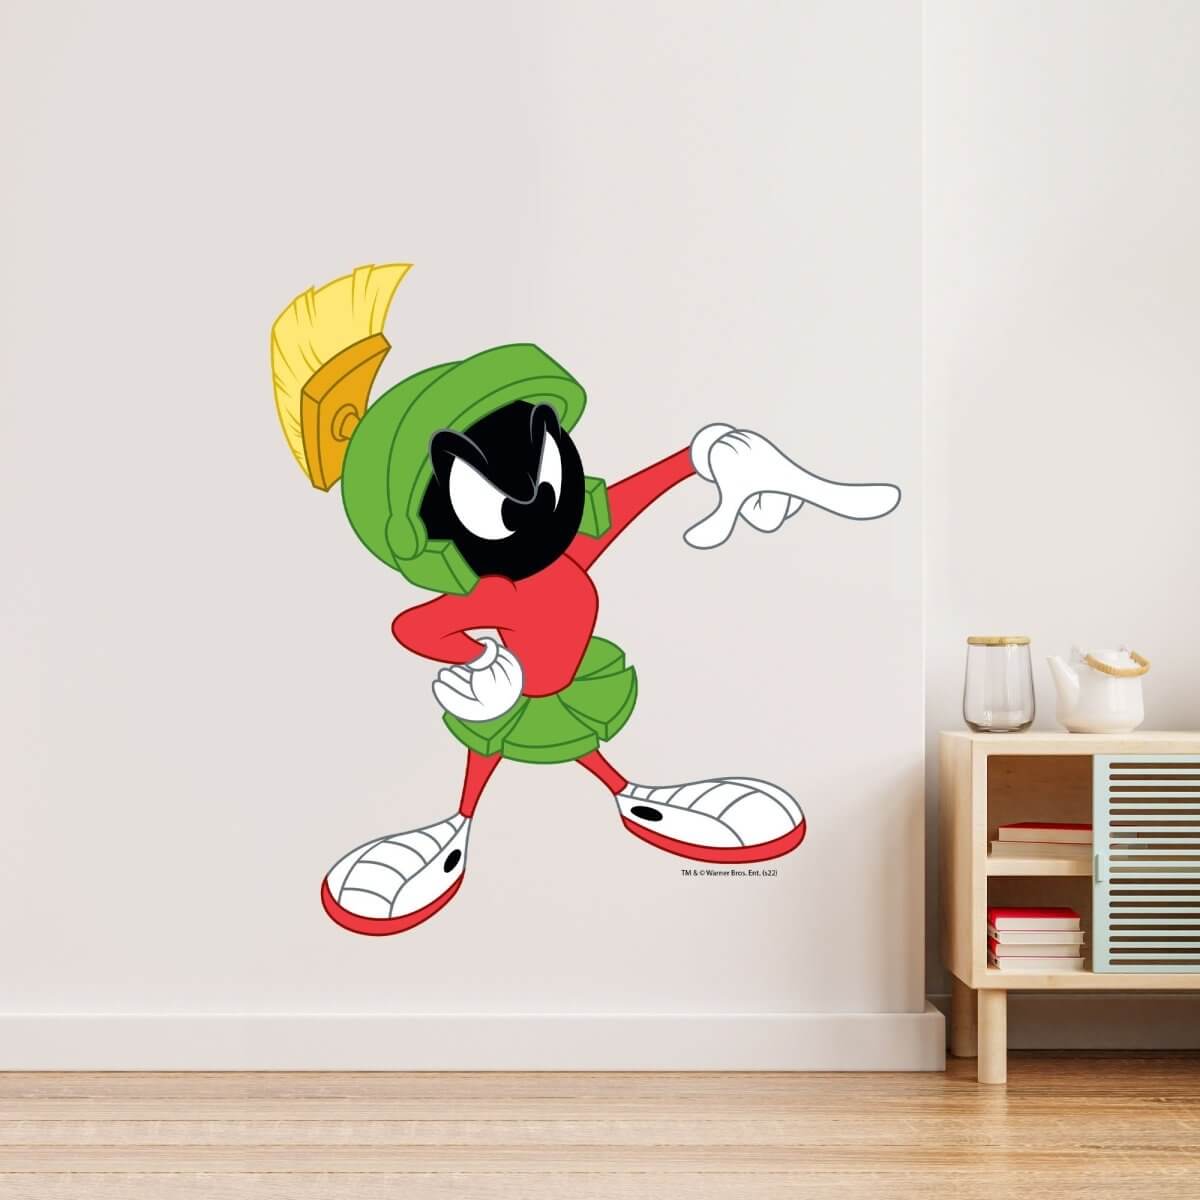 Kismet Decals Looney Tunes Marvin Instructing Licensed Wall Sticker - Easy DIY Home & Kids Room Decor Wall Decal Art - Kismet Decals